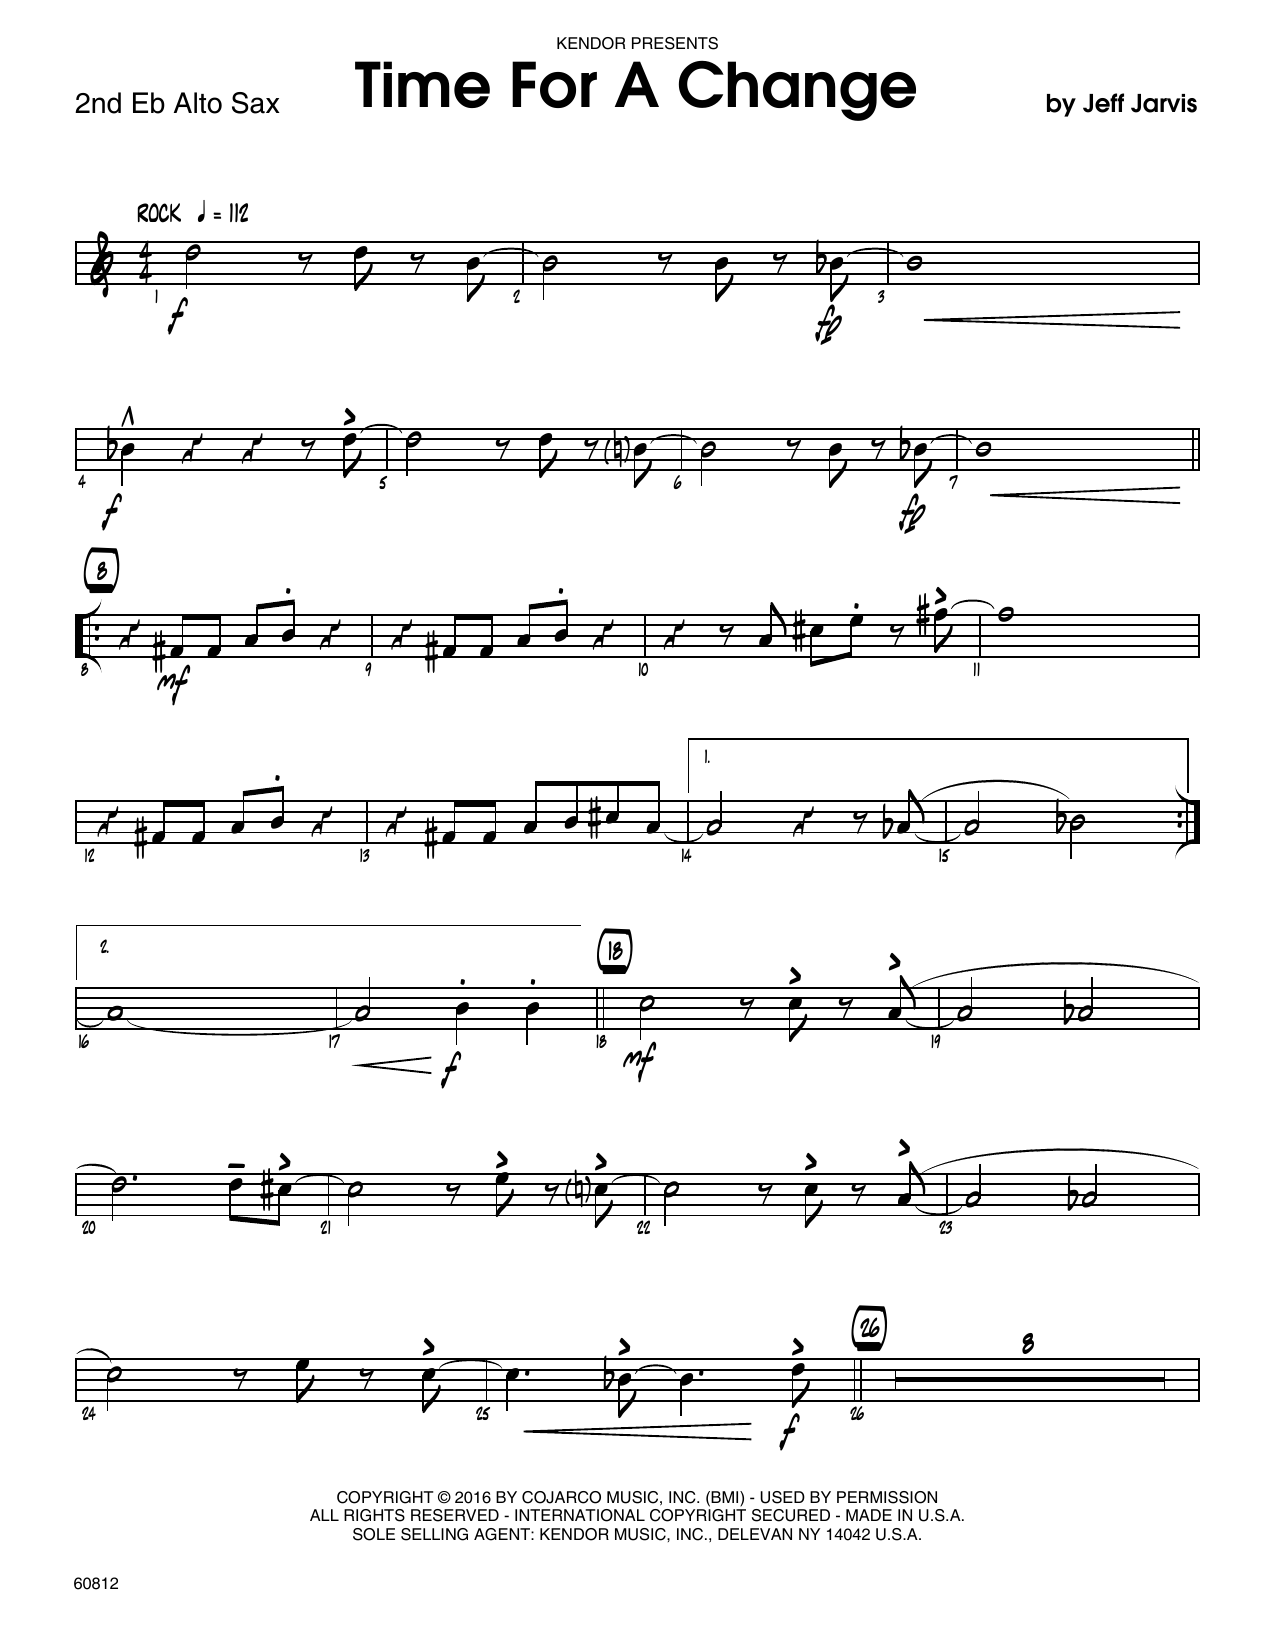 Download Jeff Jarvis Time For A Change - 2nd Eb Alto Saxopho Sheet Music